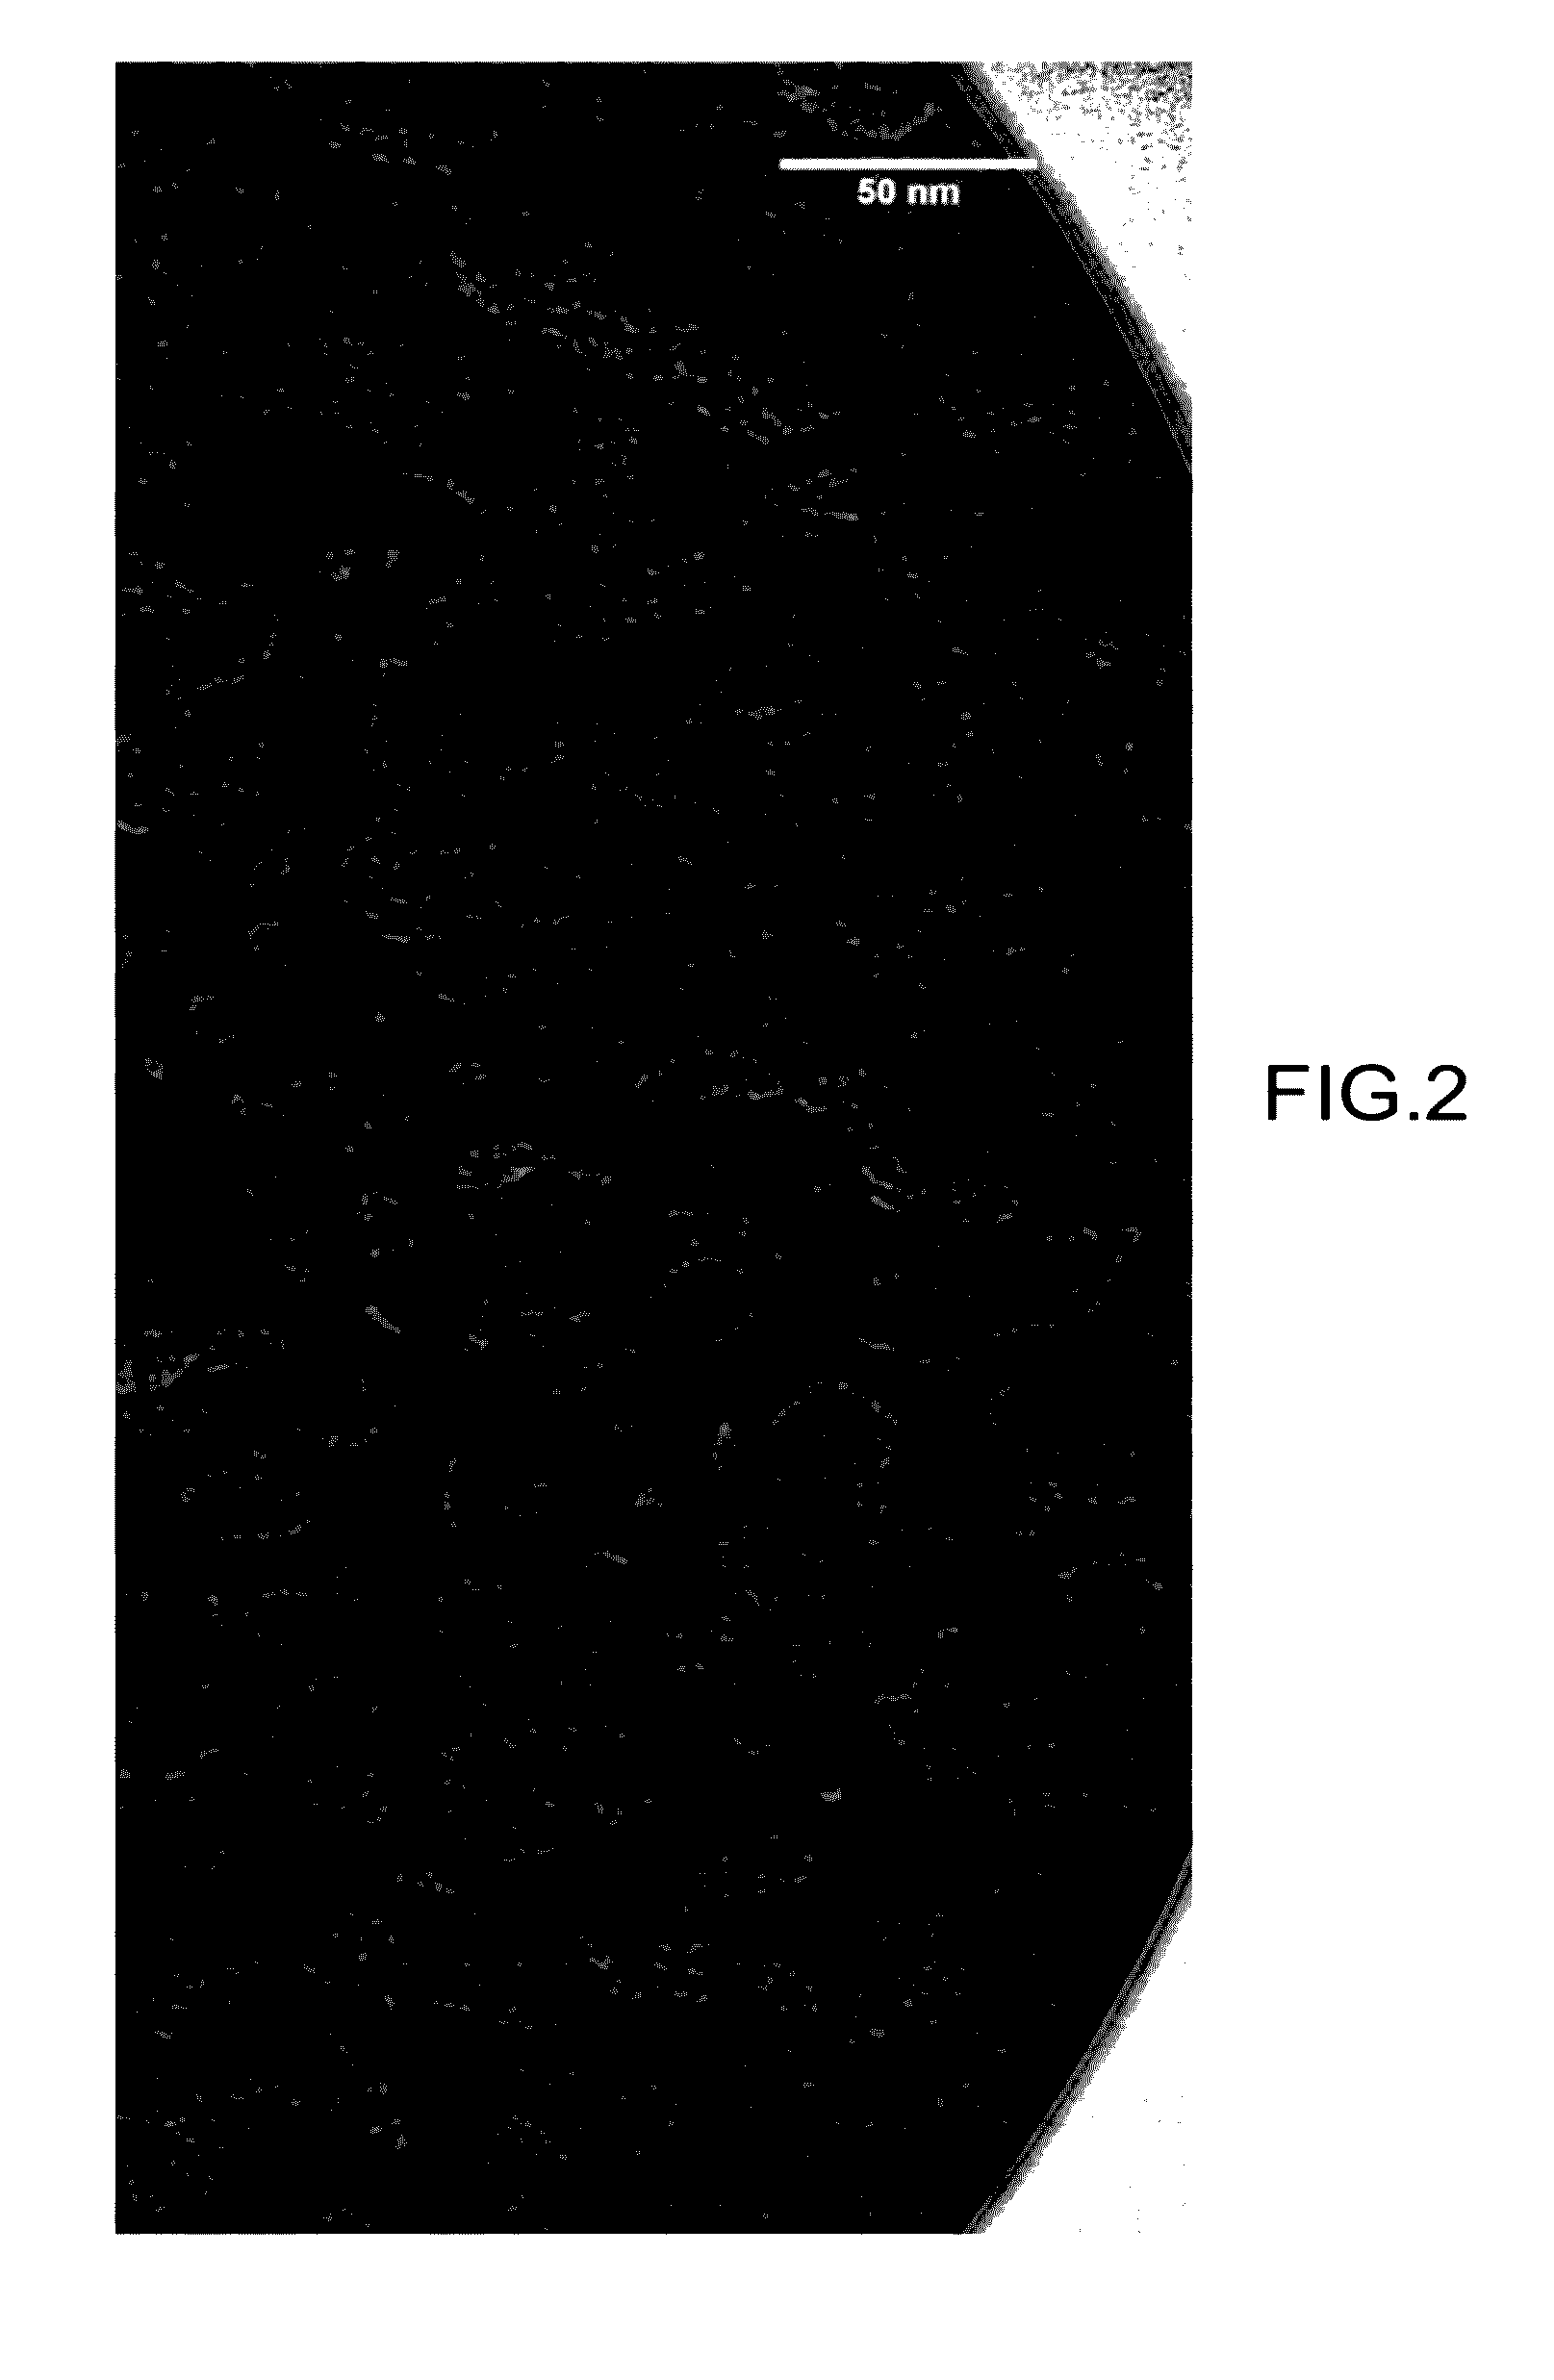 Inorganic cellular monobloc cation-exchange materials, the preparation method thereof, and separation method using same